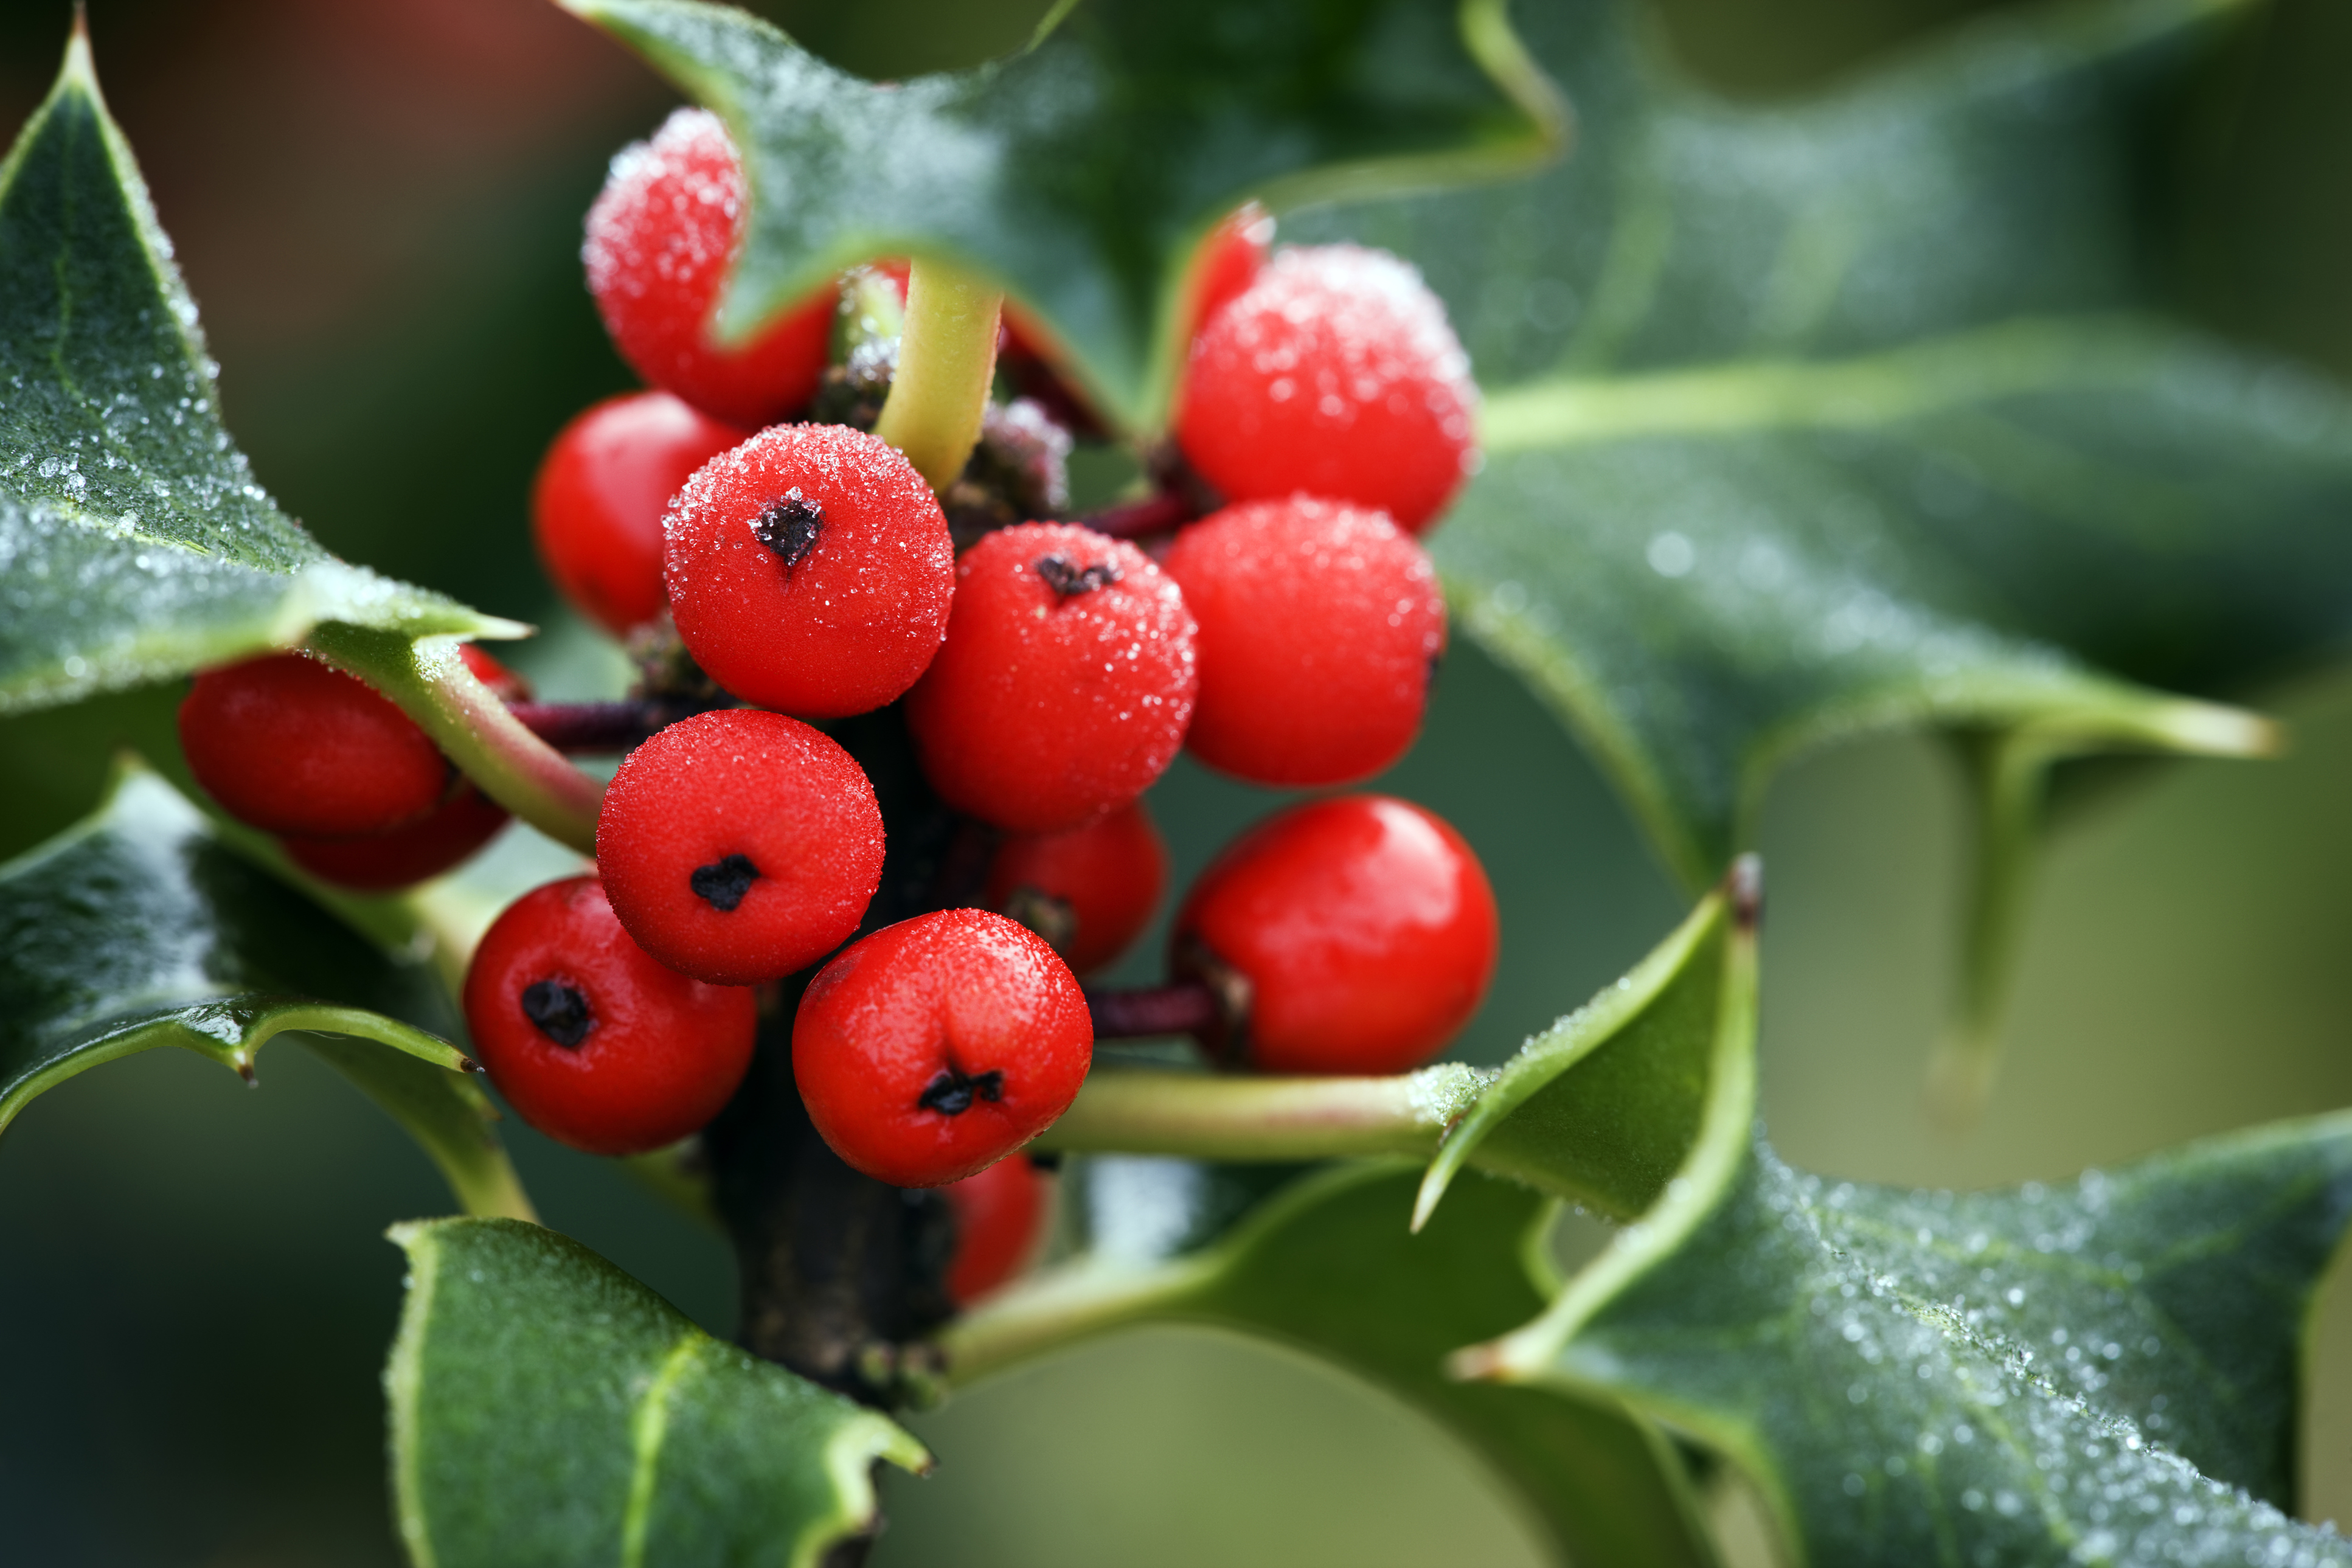 Why do we decorate with holly at Christmas? | HowStuffWorks